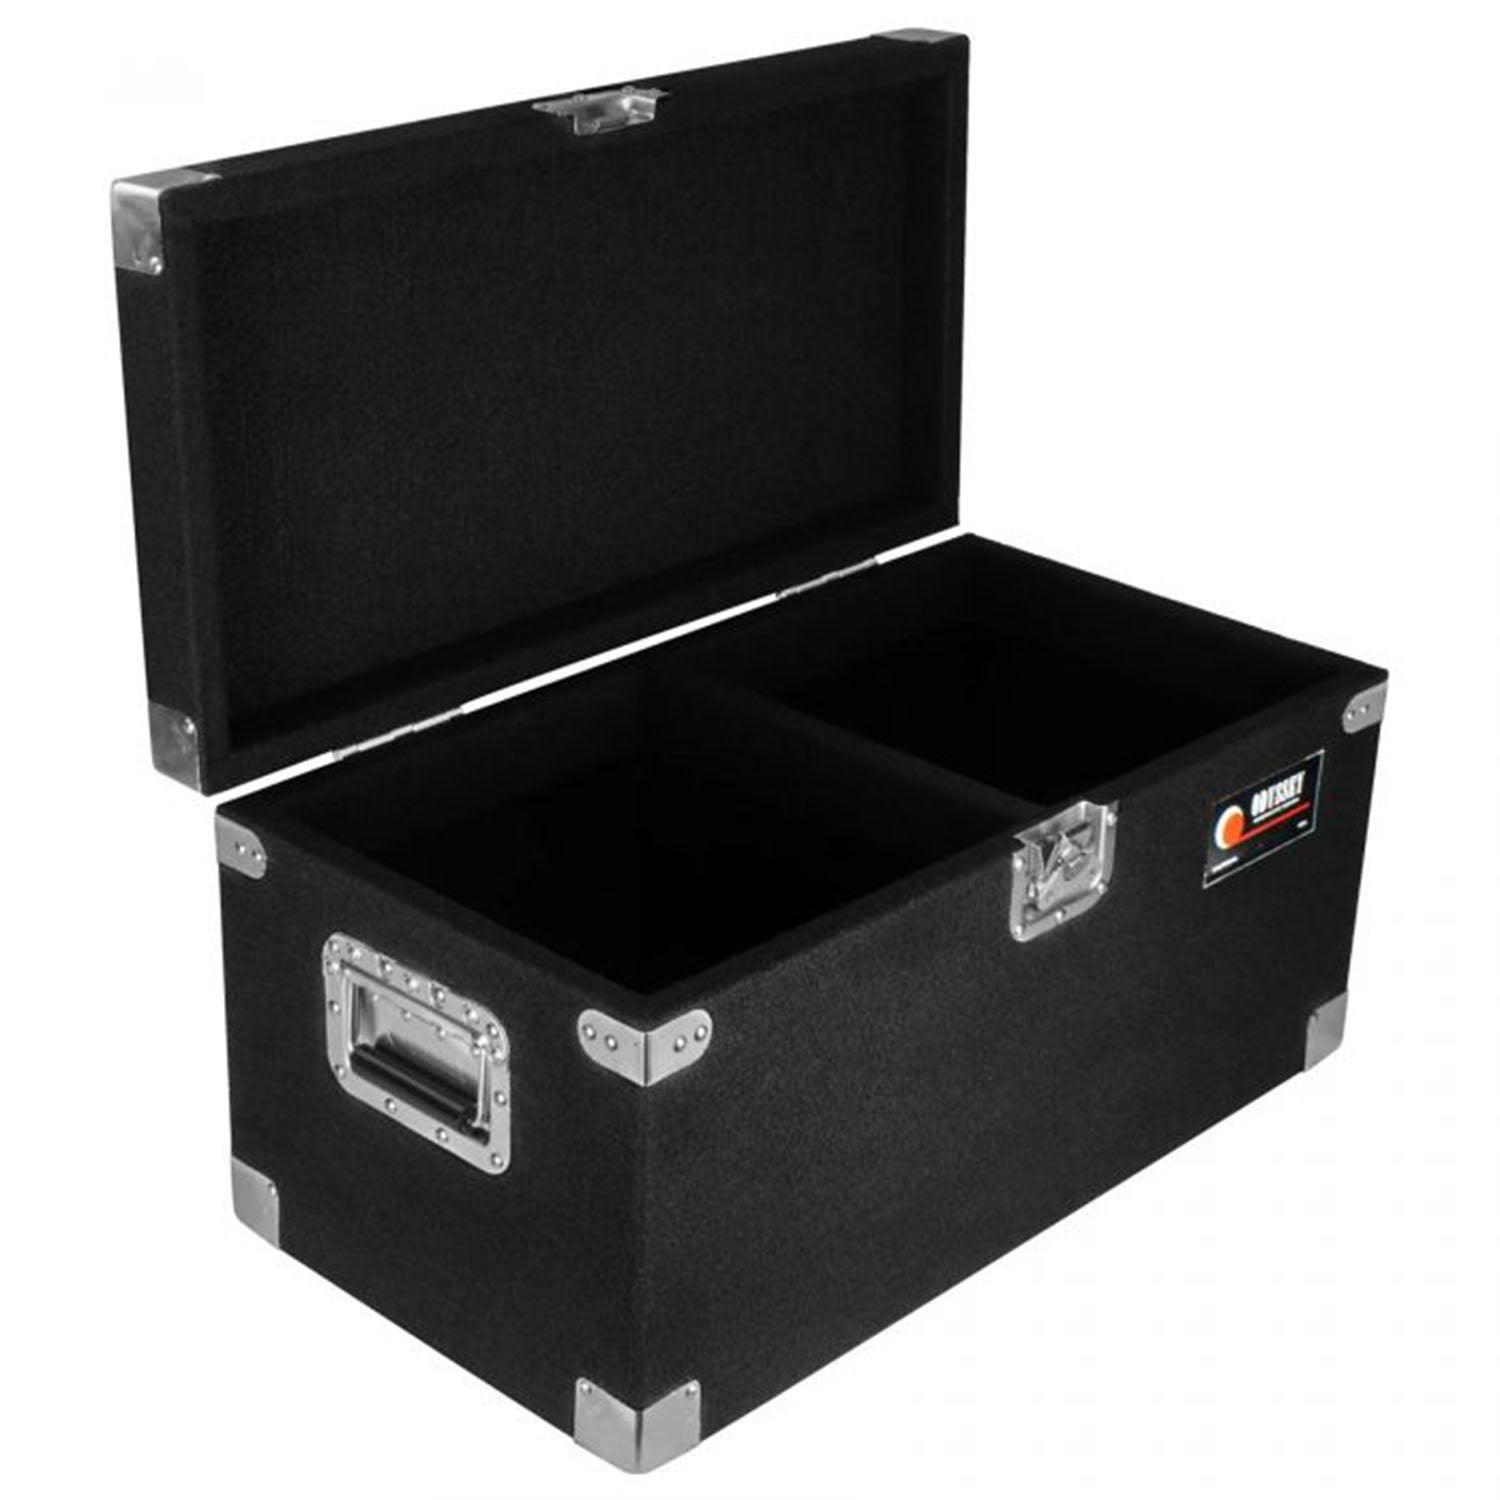 Odyssey CLP200P, Pro Record/Utility Carpet Case For 200 Vinyl Records/LPs - Hollywood DJ